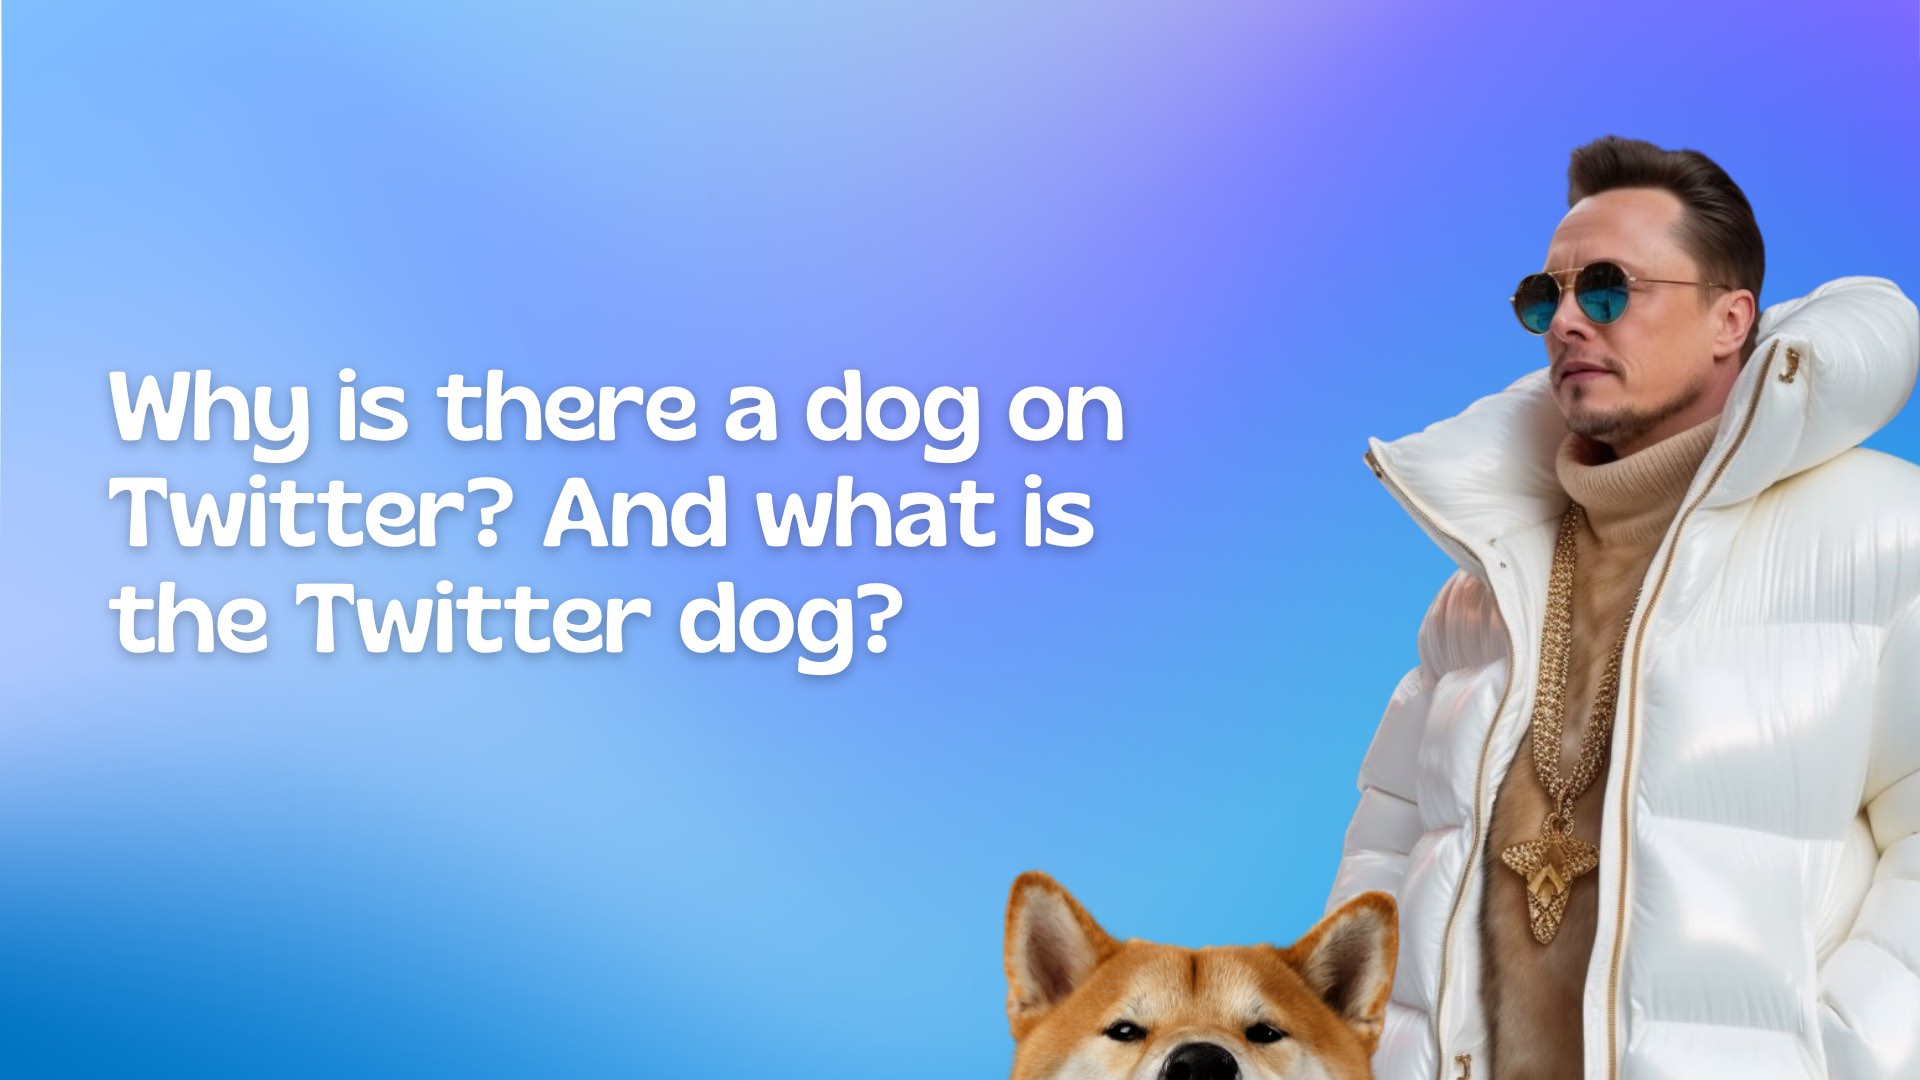 Why is there a dog on Twitter? And what is the Twitter dog?